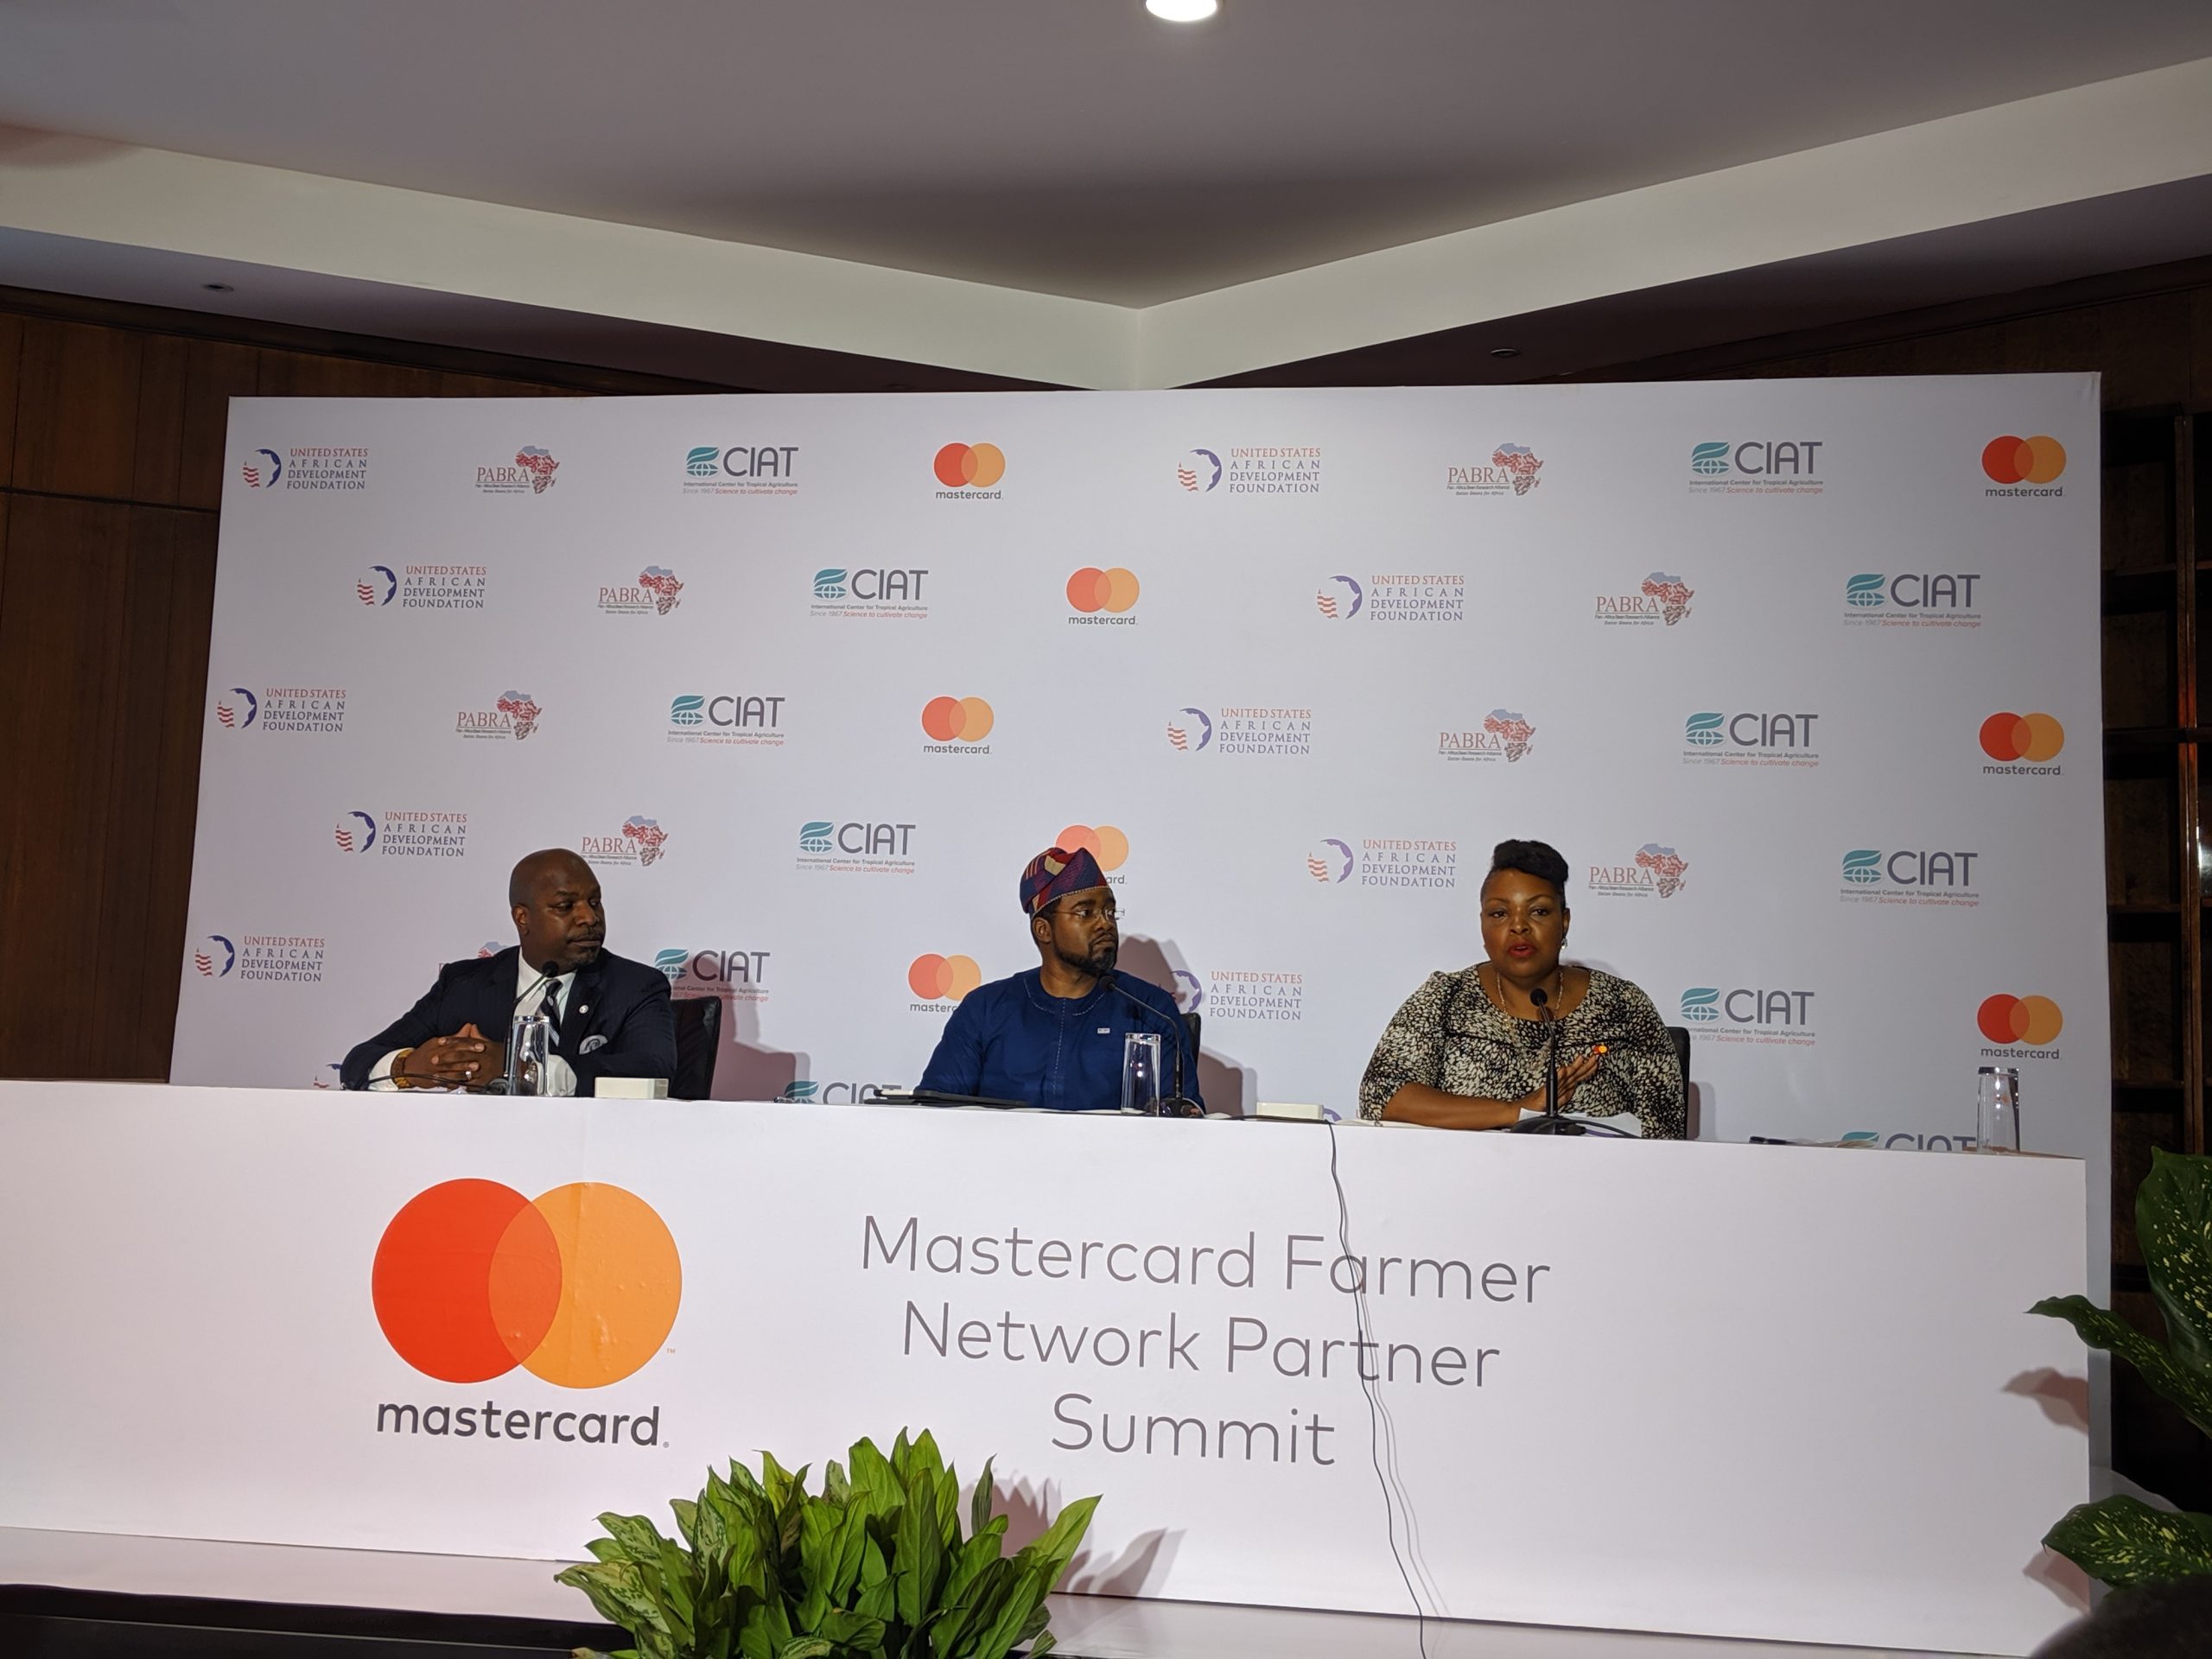 (L-R) Salah Goss, Head of Mastercard Labs for Financial Inclusion,